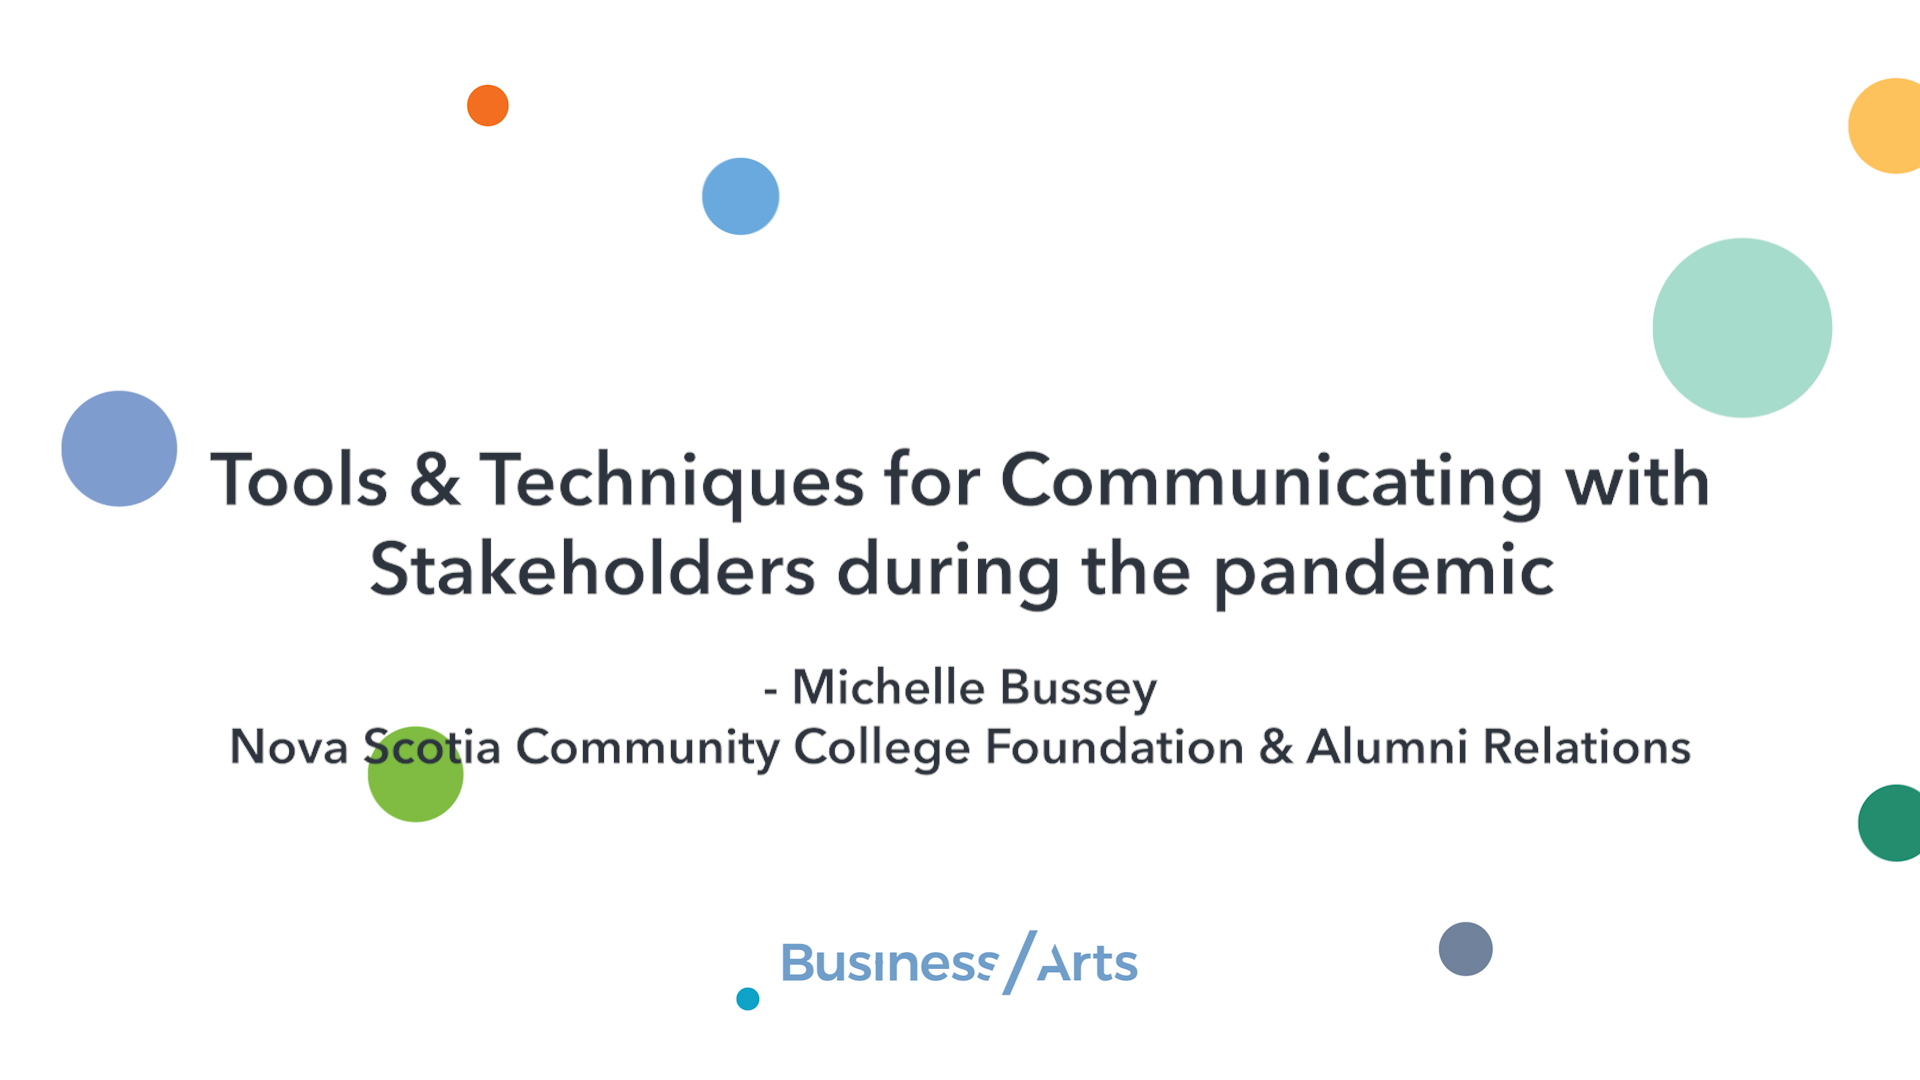 Tools & Techniques for Communicating with Stakeholders